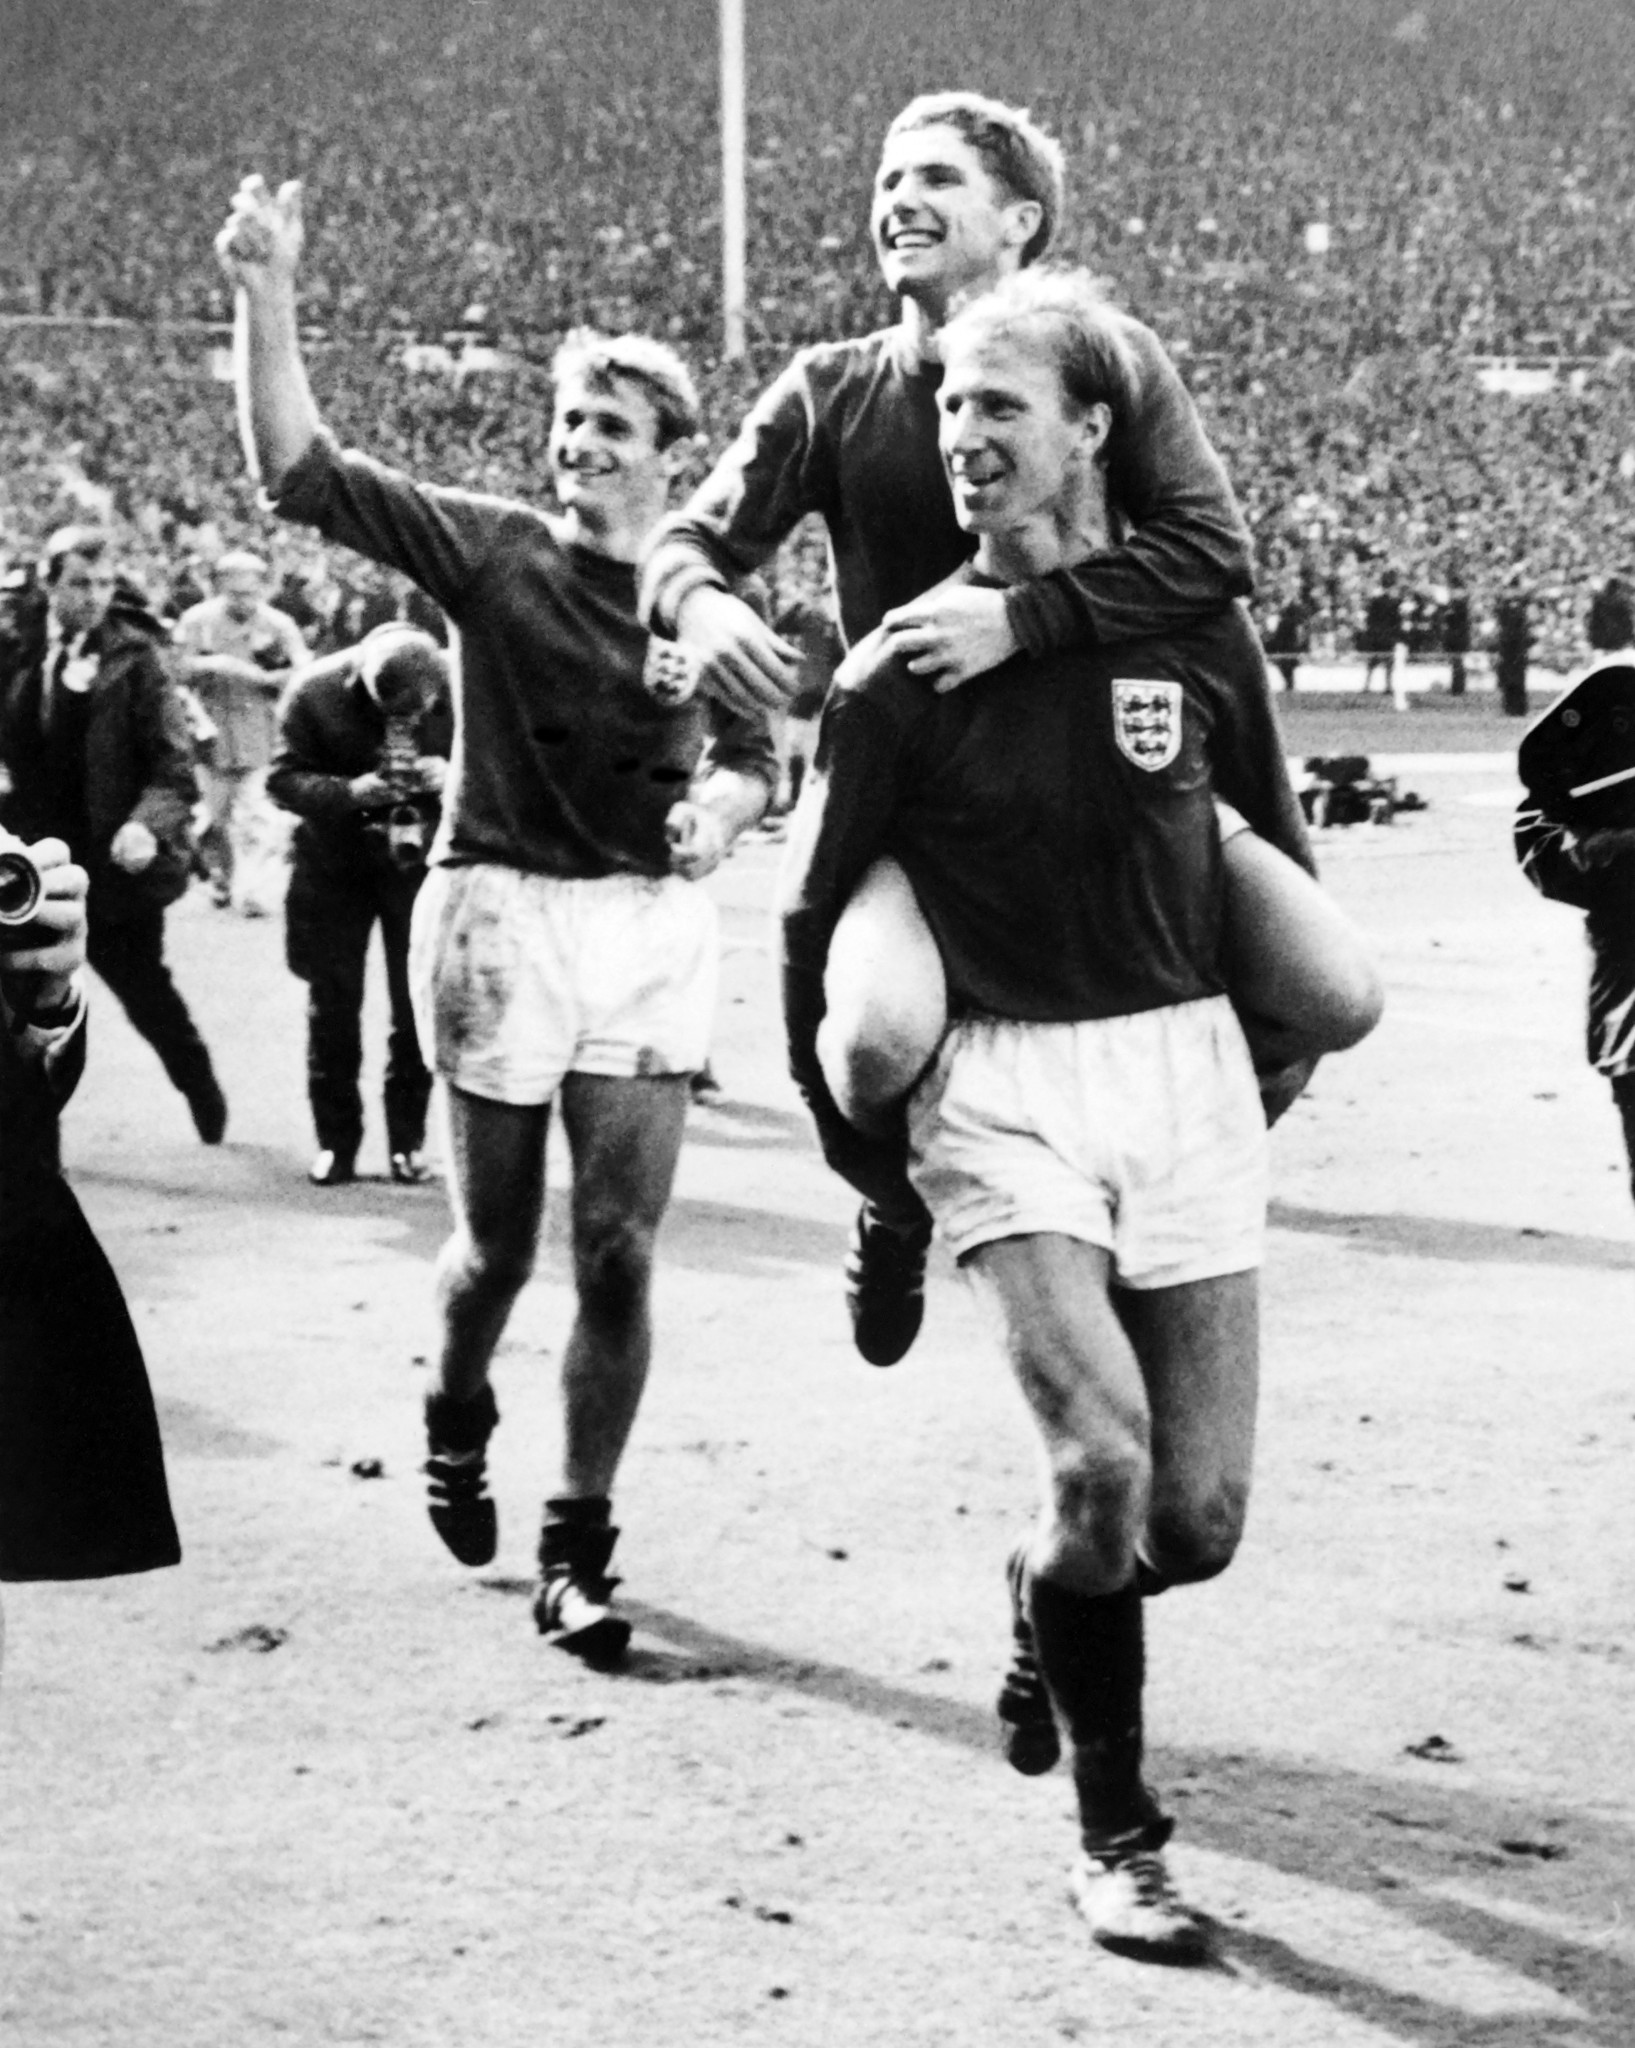 Alan Ball, being carried, was at 21 the youngest member of England's 1966 FIFA World Cup winning team ©Getty Images